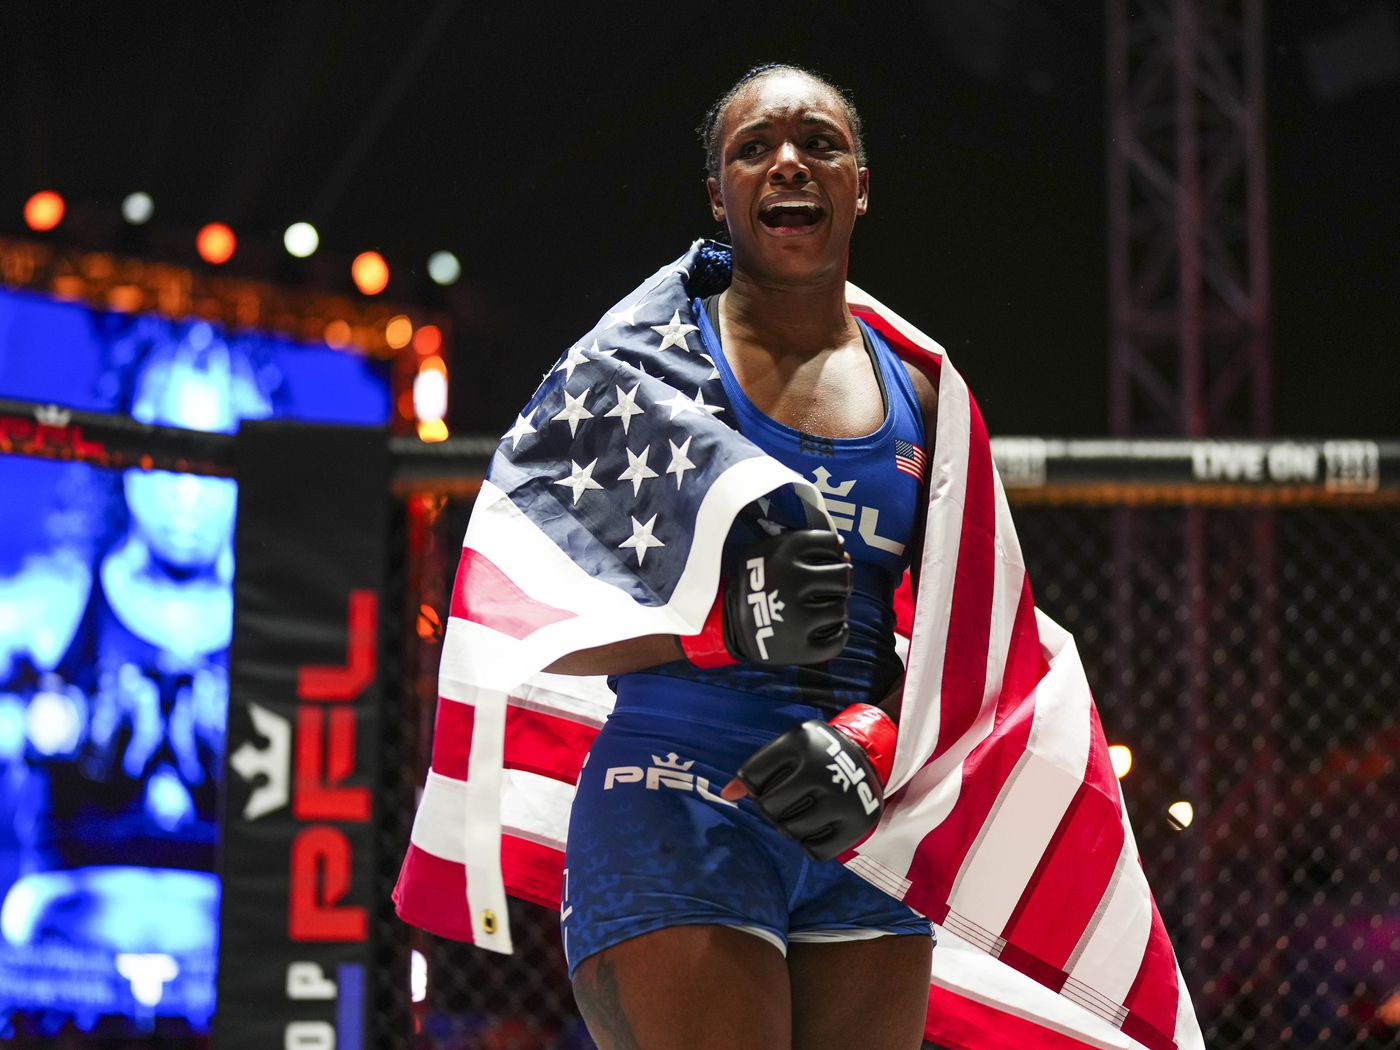 Claressa Shields Challenges Cris Cyborg To Boxing Match After Sparring Claims